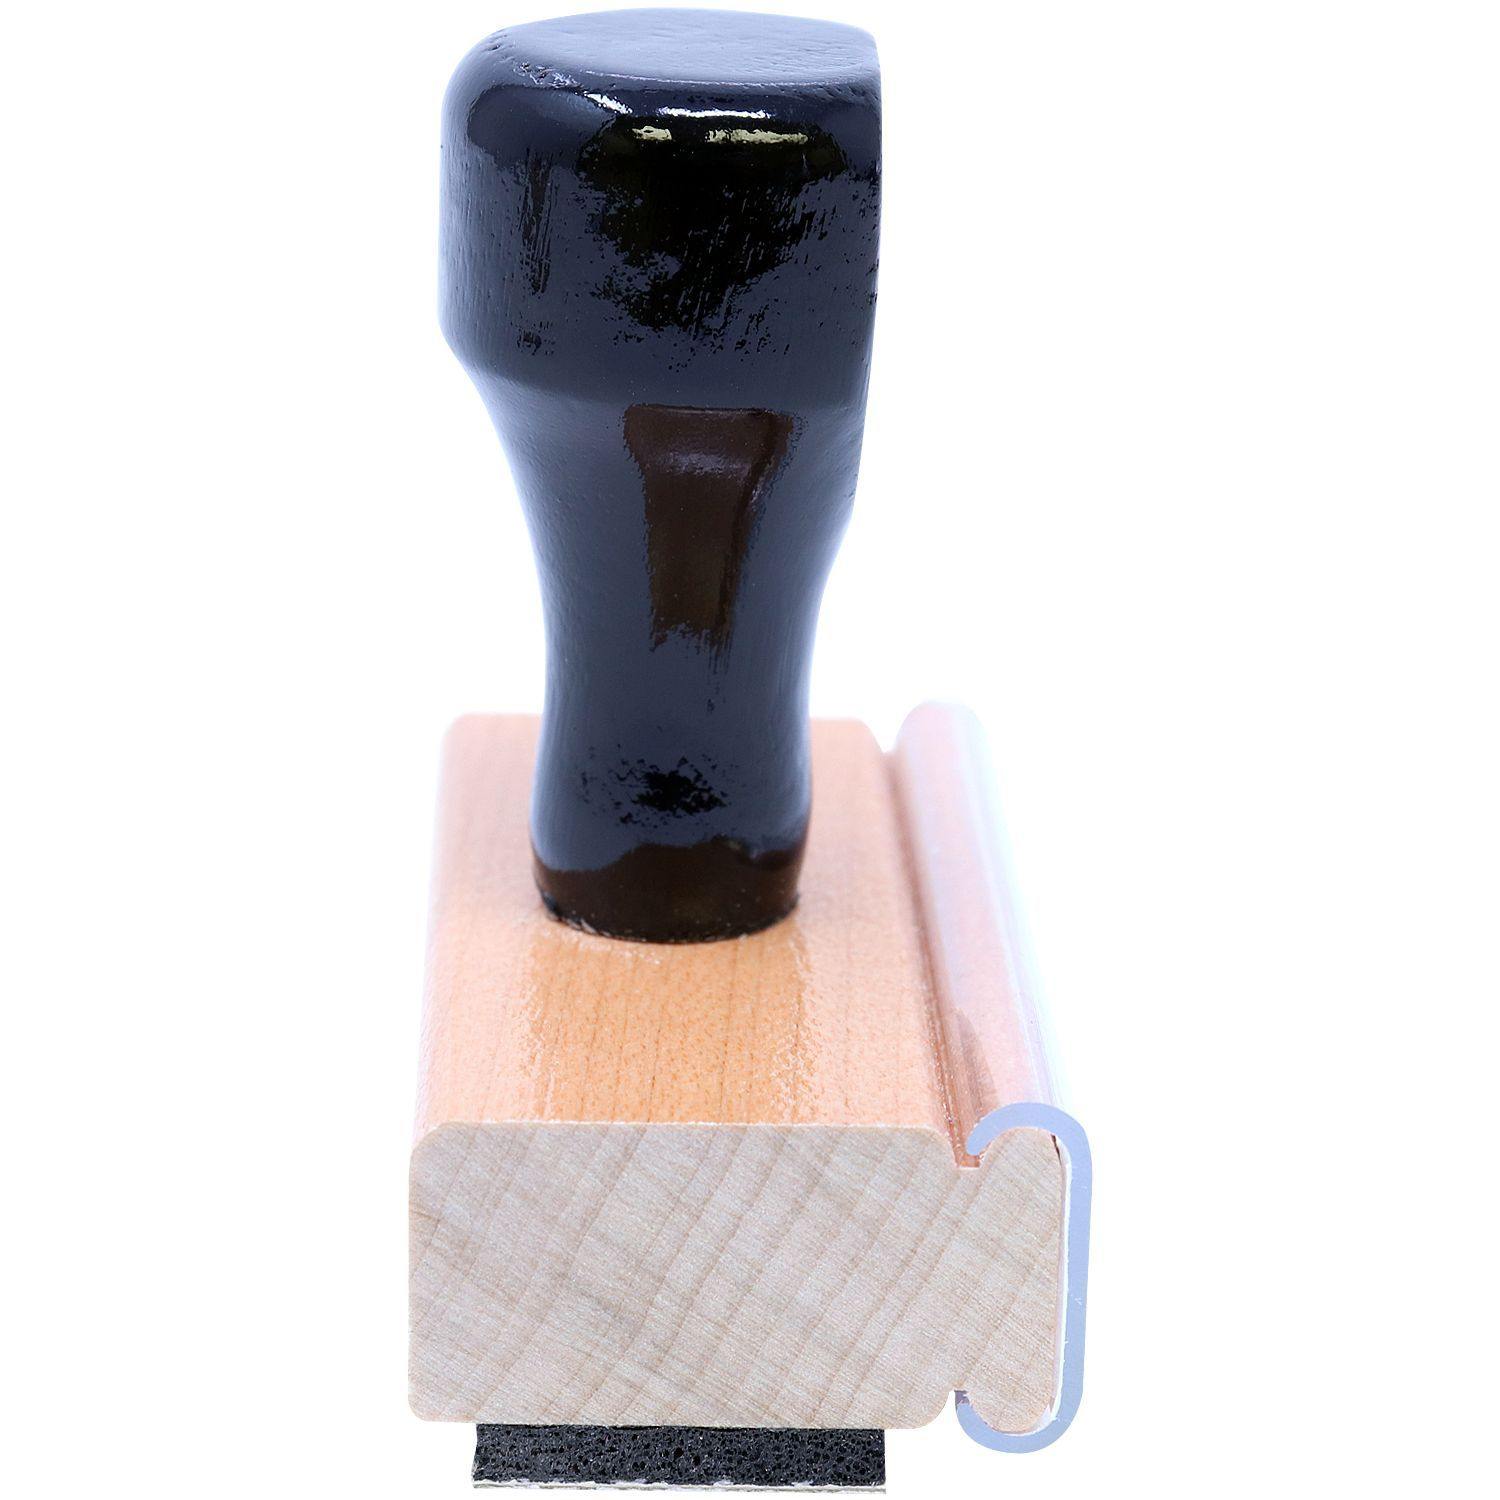 Outline Approved Rubber Stamp - Engineer Seal Stamps - Brand_Acorn, Impression Size_Small, Stamp Type_Regular Stamp, Type of Use_Business, Type of Use_General, Type of Use_Office, Type of Use_Professional